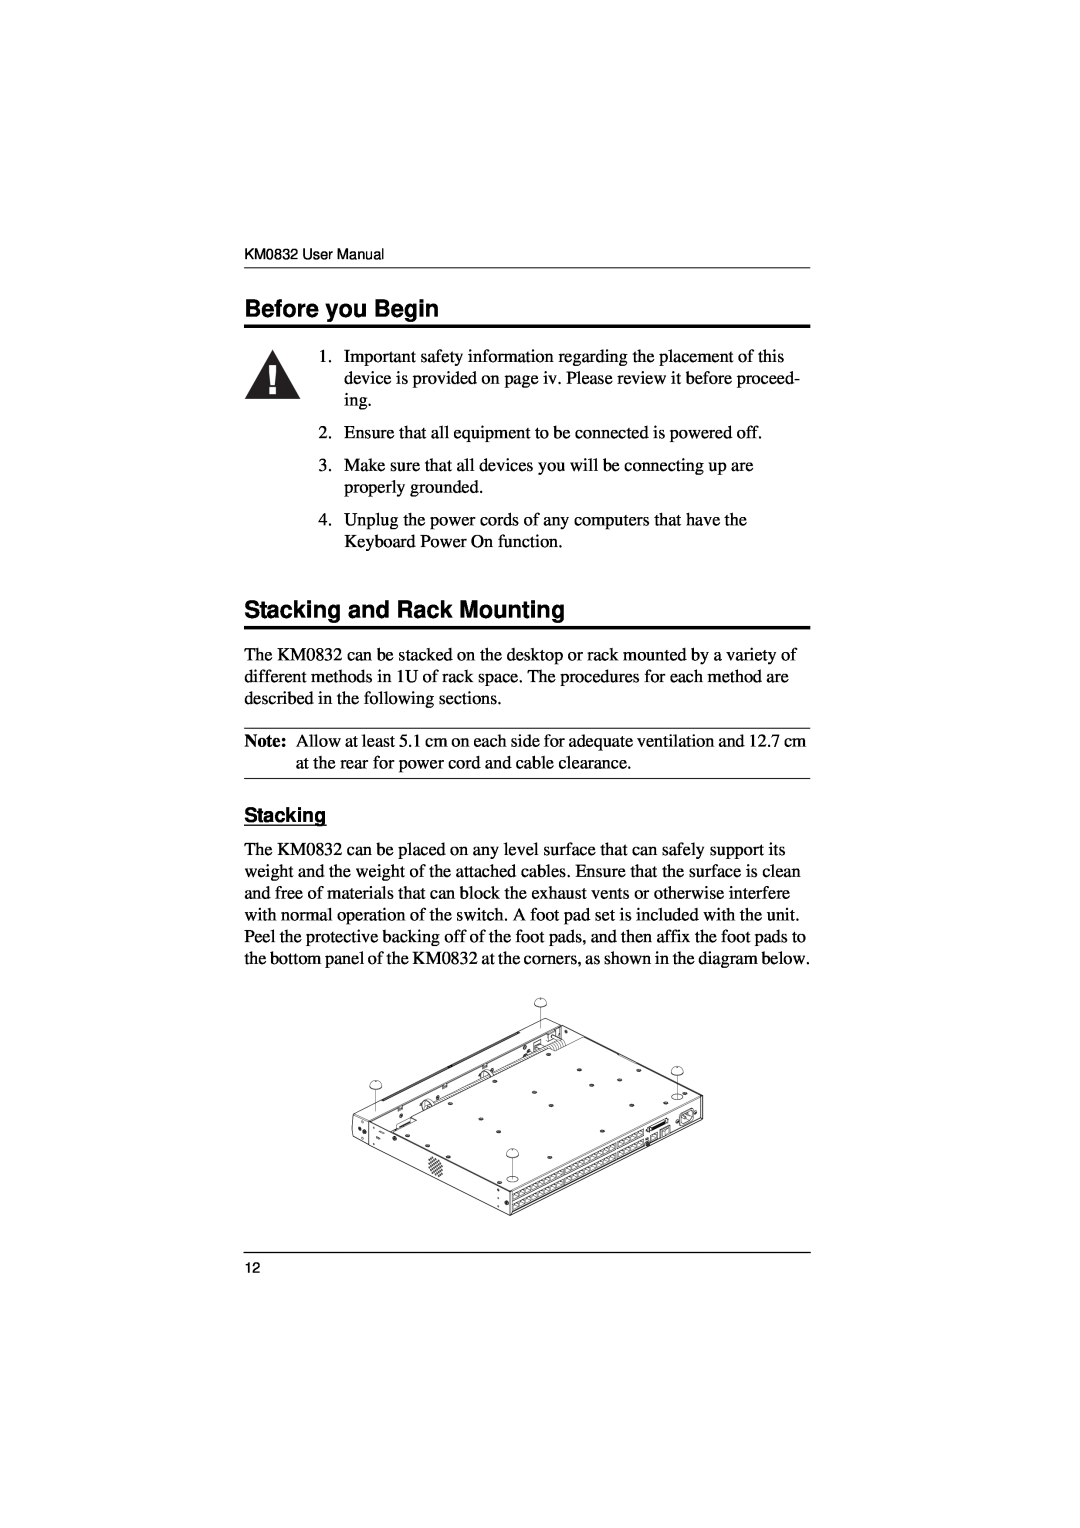 ATEN Technology KM0832 user manual Before you Begin, Stacking and Rack Mounting 